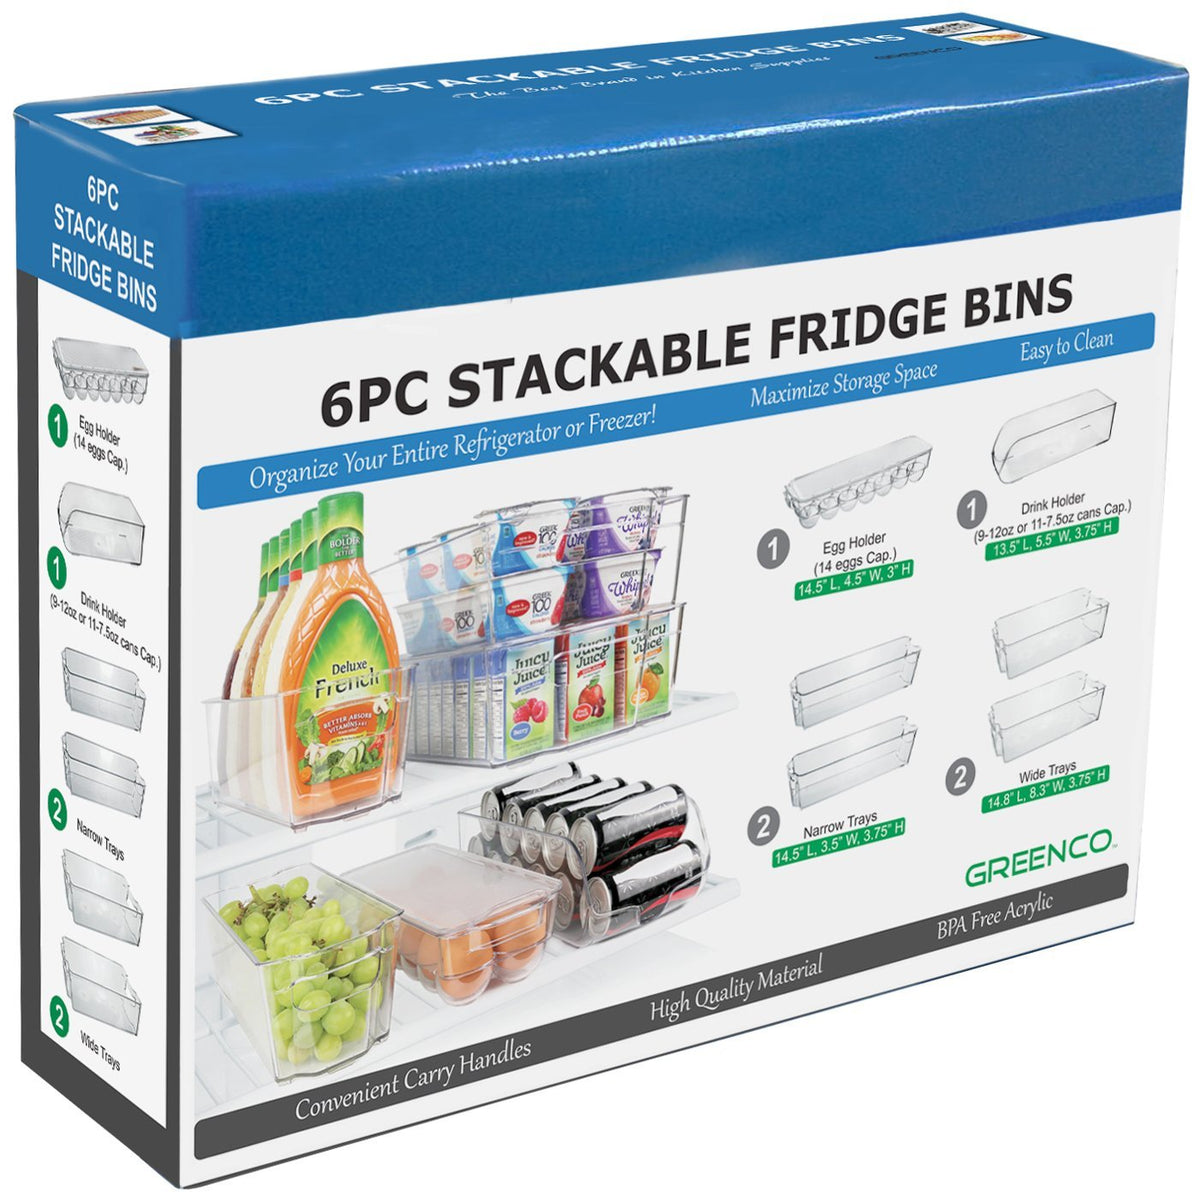  fridge bins and organizers Set of 10 - Stackable refrigerator  bins set includes 6 bins for food containers and 4 precut shelf liners for  fridge shelf's: Home & Kitchen